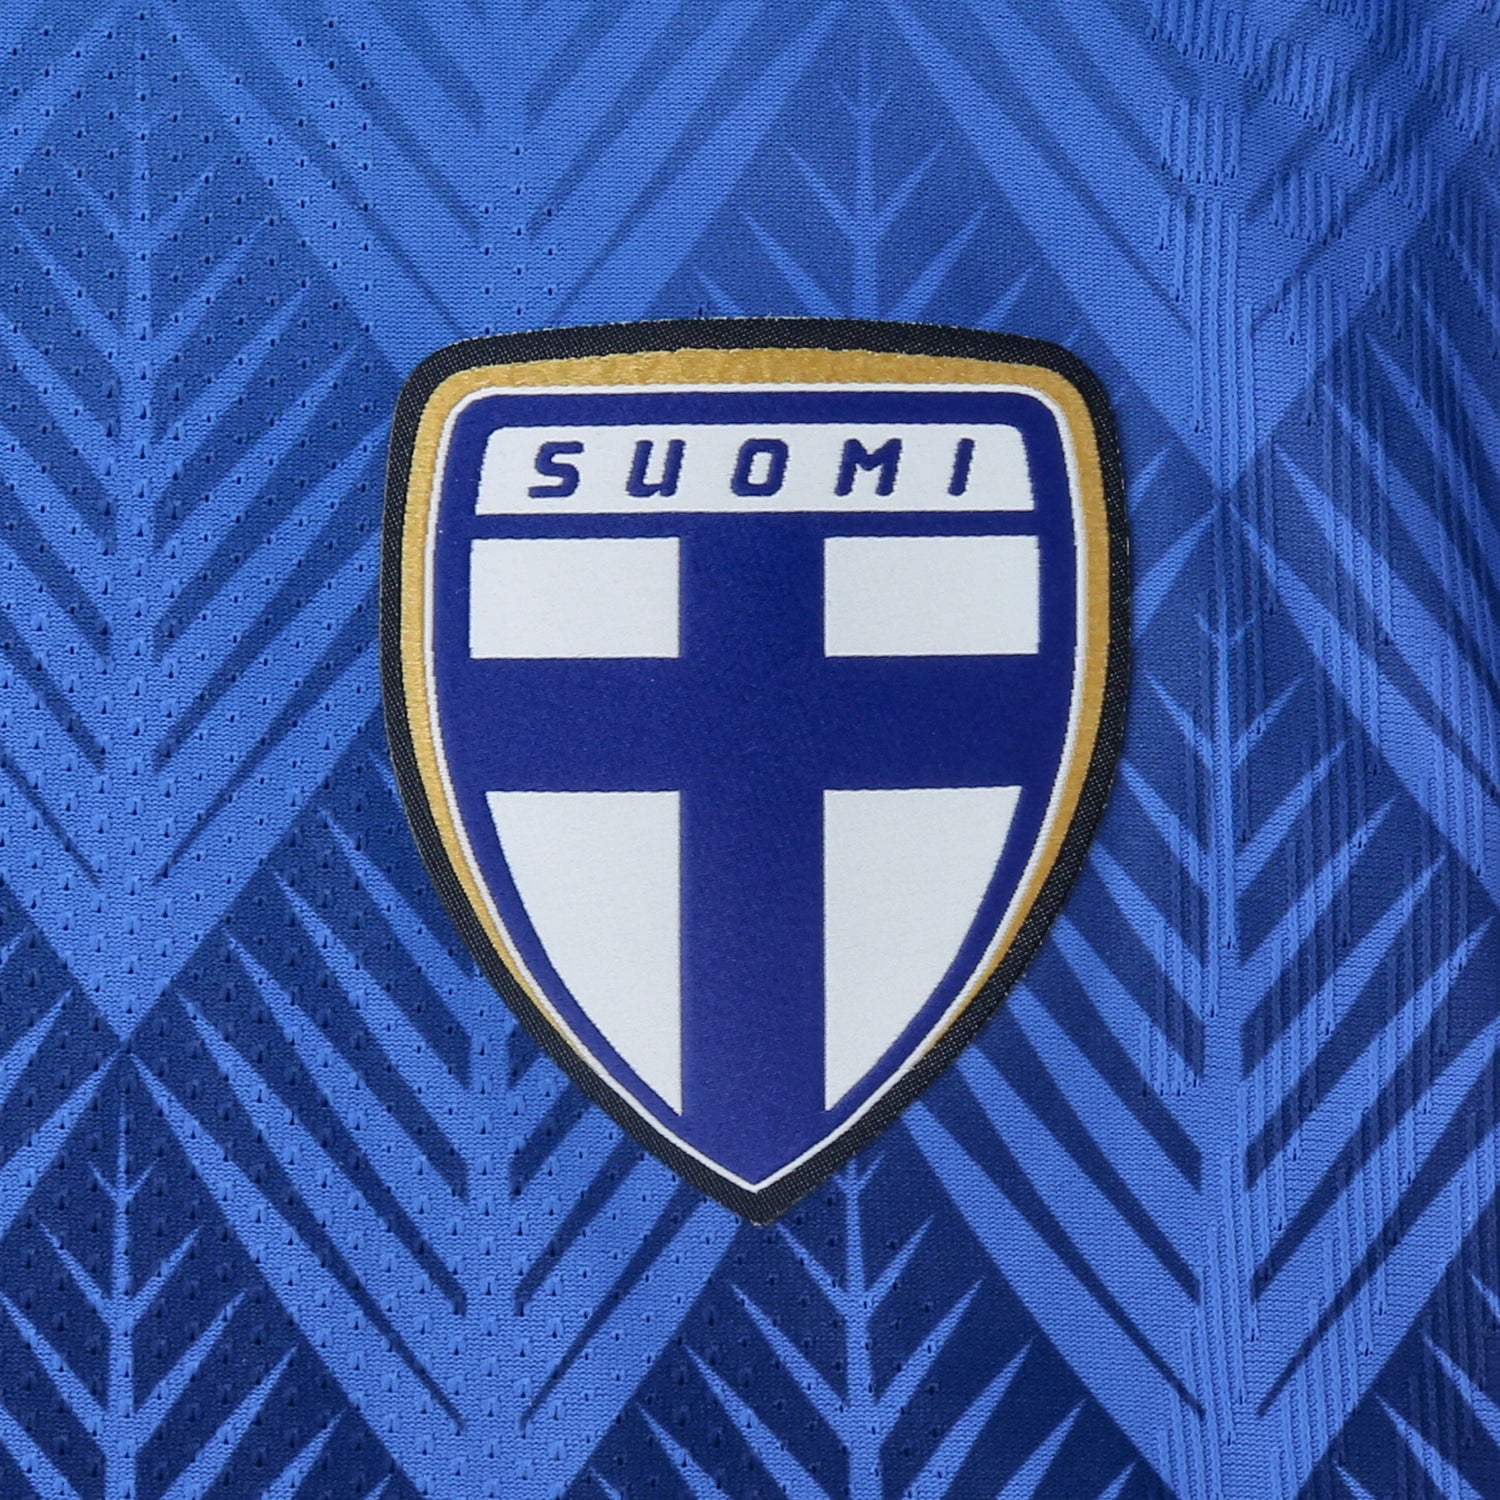 Finland 1000 A-National Team Heroes Away Jersey Special Edition